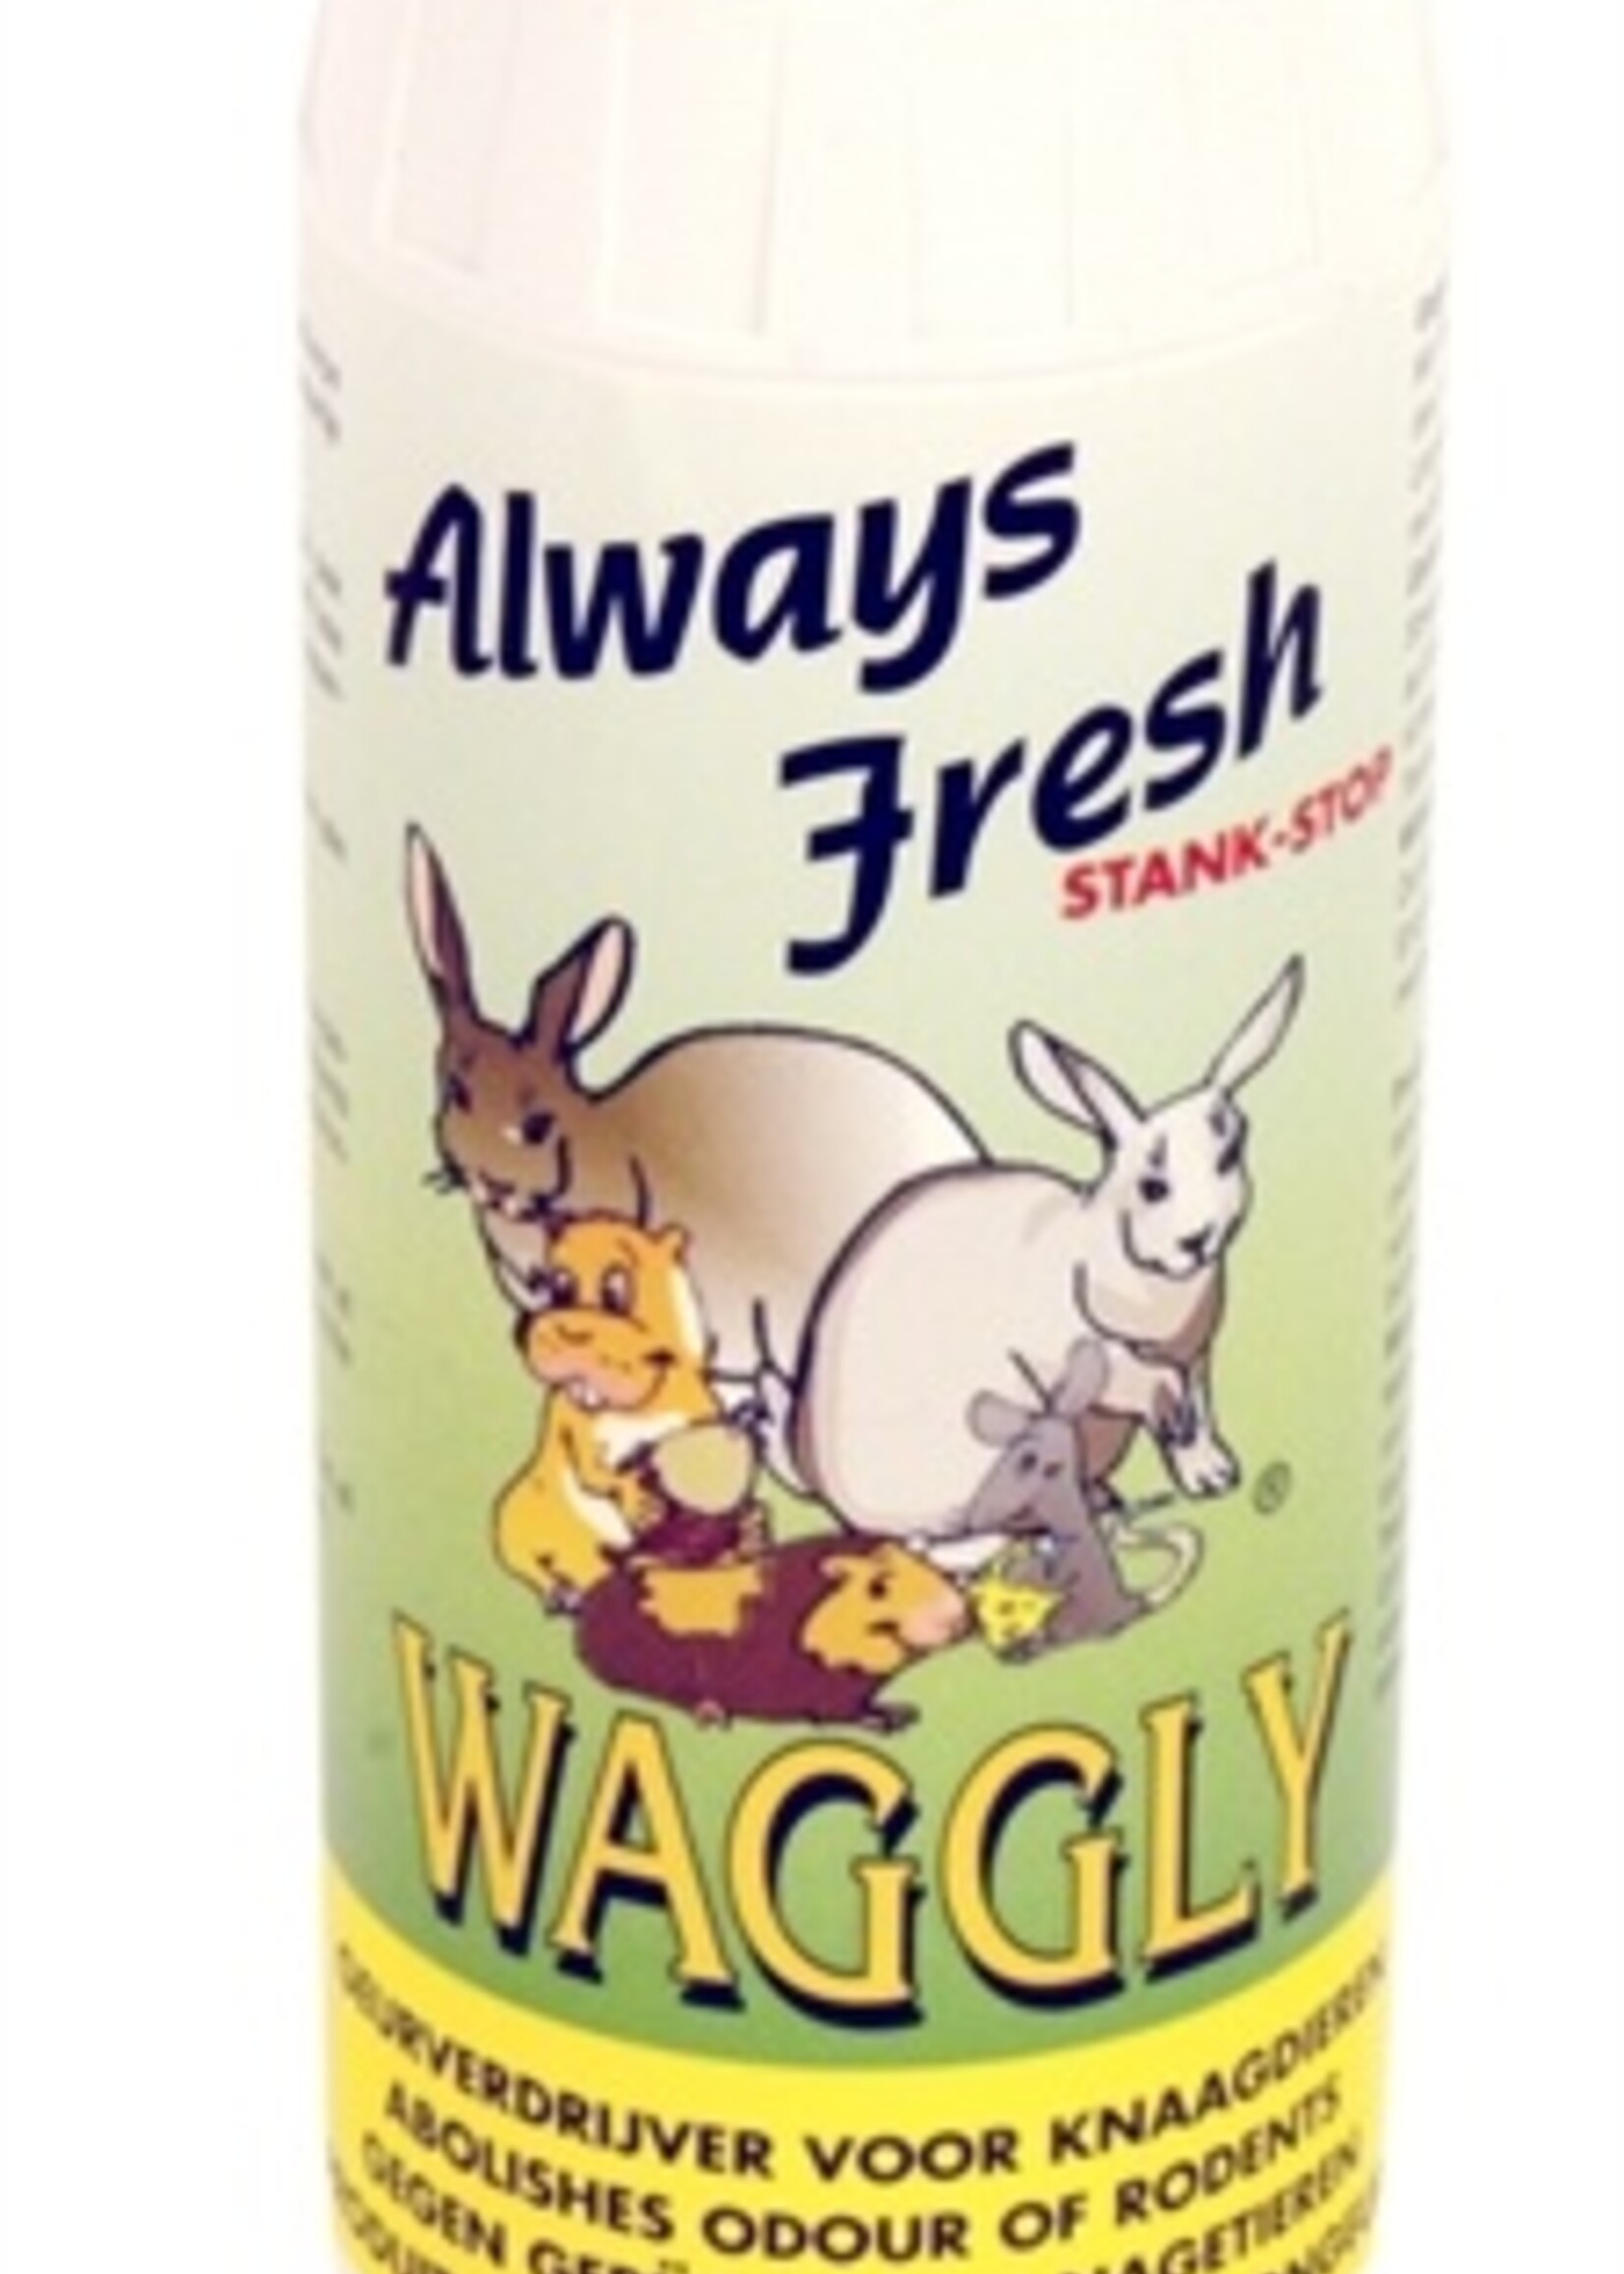 Waggly Waggly always fresh stankstop